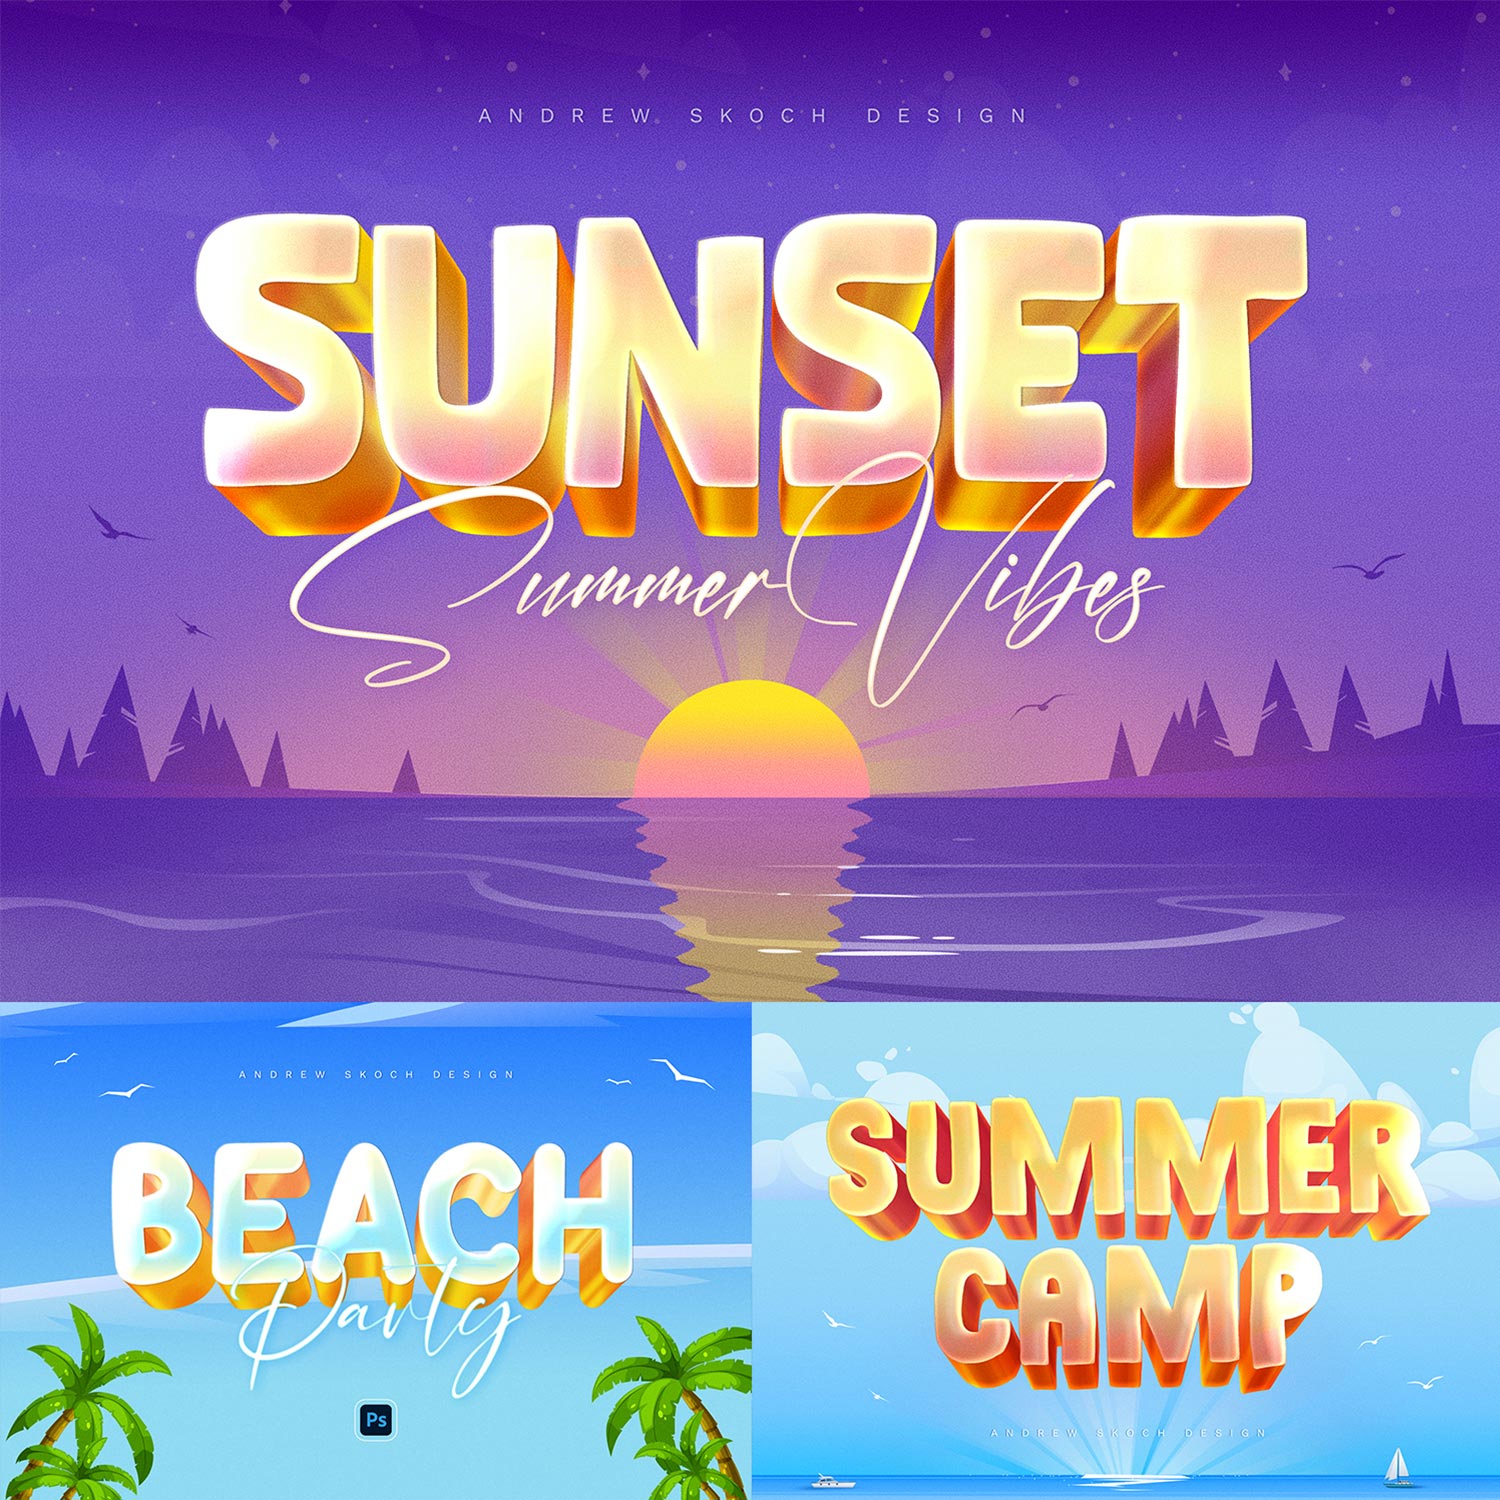 Summer Text Effects cover image.